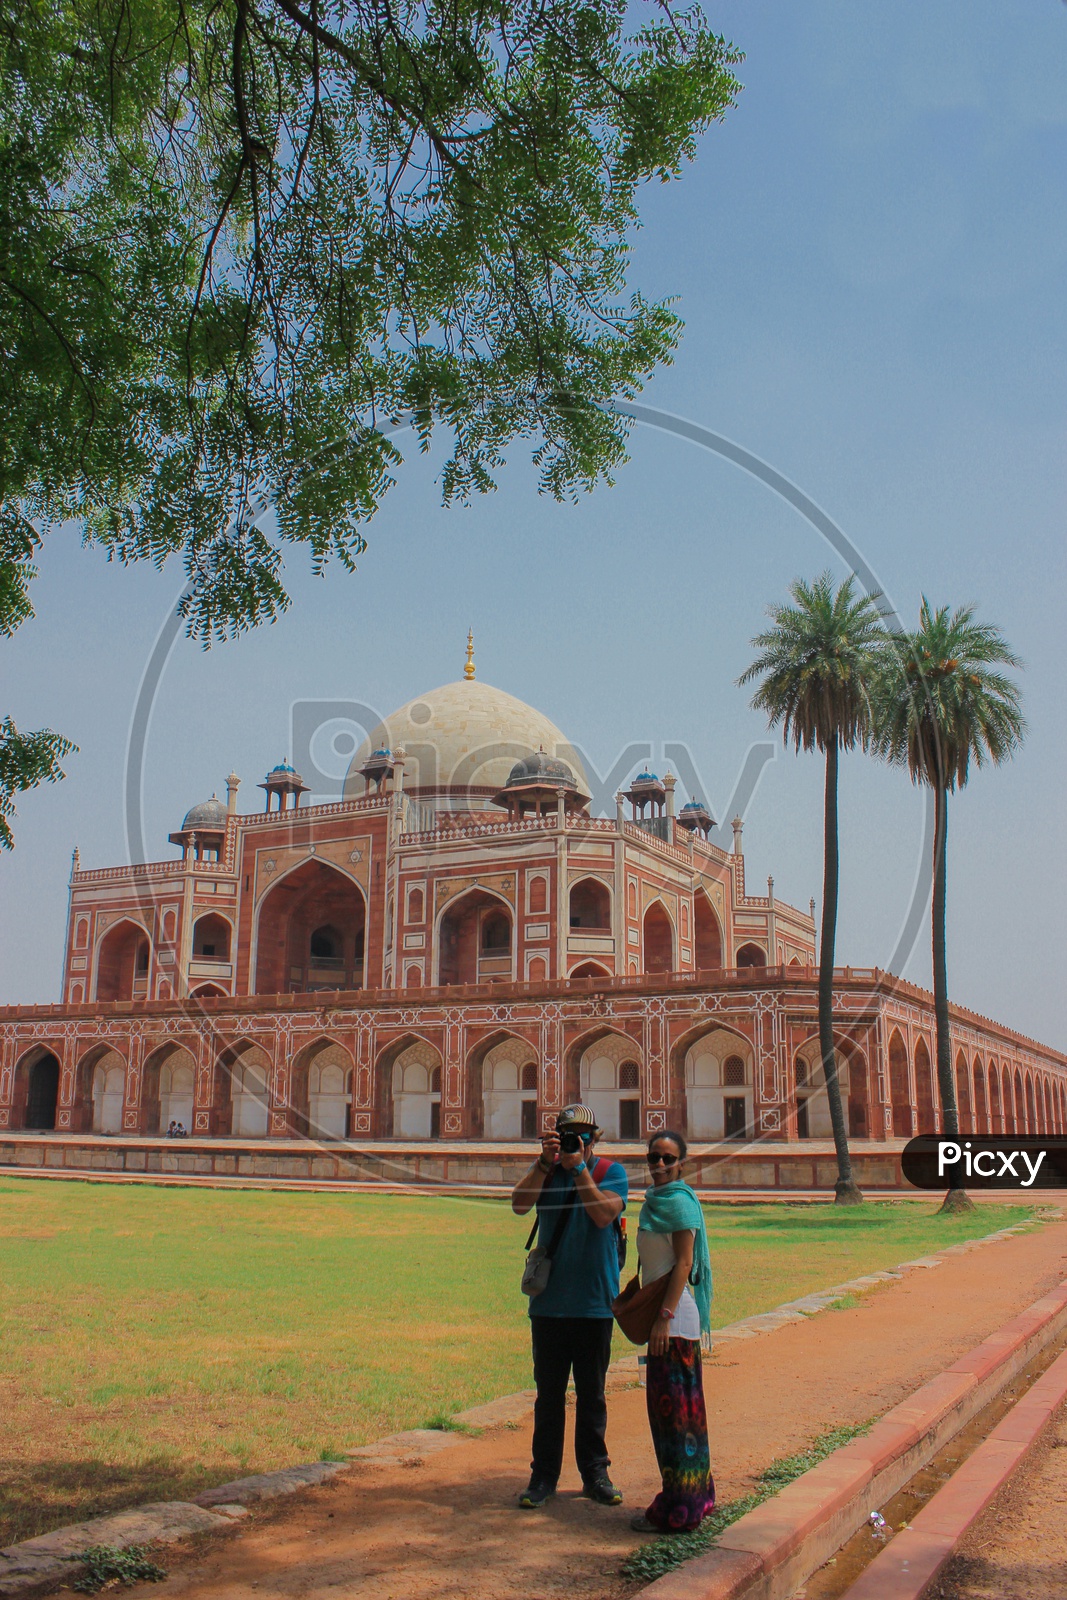 Two photographers capturing each other infront of the india's great historic architectural Humayun's tomb.